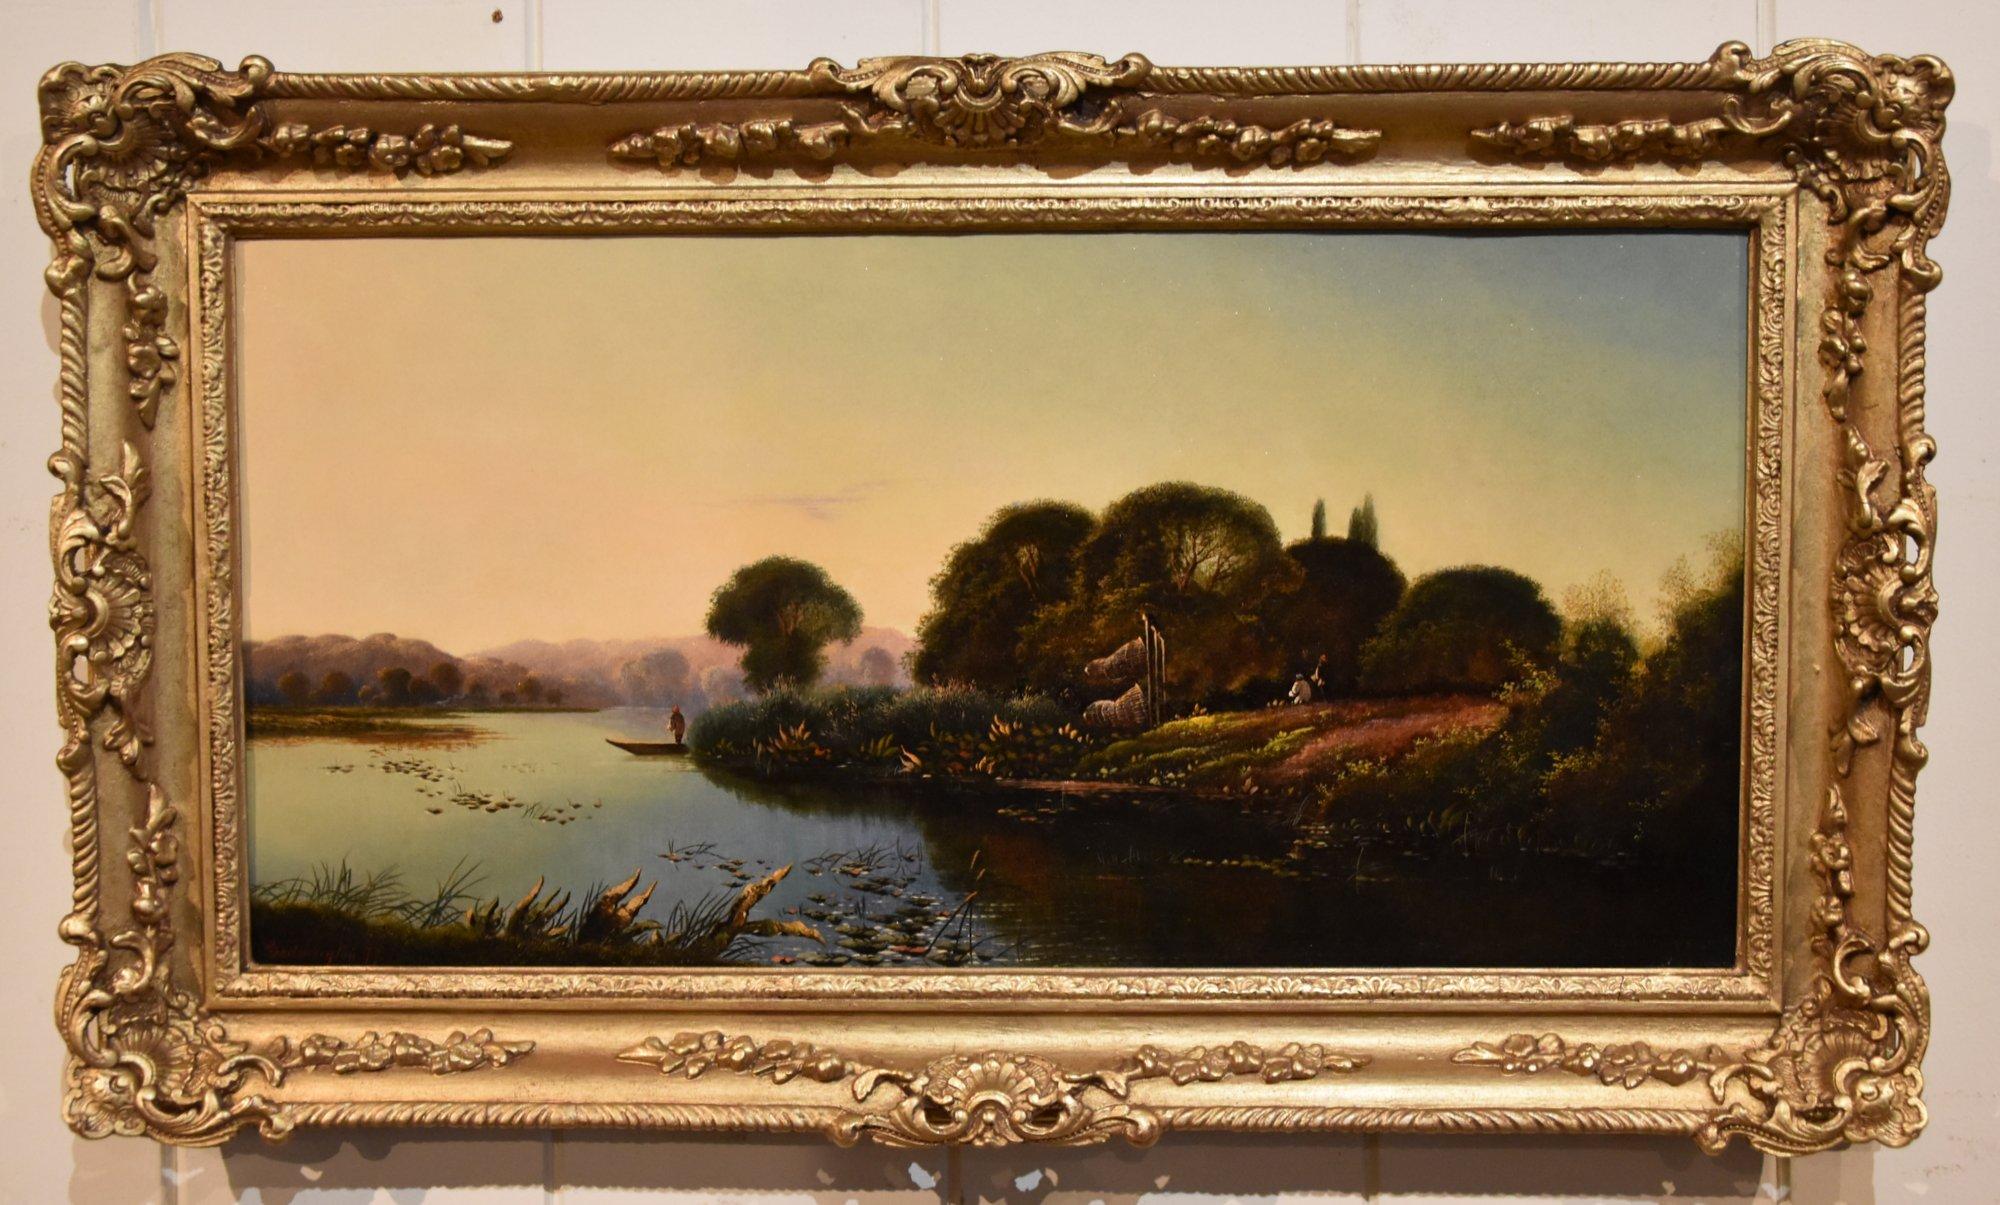 Oil Painting by Edwin Henry Boddington "Evening on the Thames" Painter of Thames and North Wales landscapes. Exhibitor at the Royal Academy and B.I, son of Henry John Boddington member of the Williams clan. Oil on canvas. Signed and dated